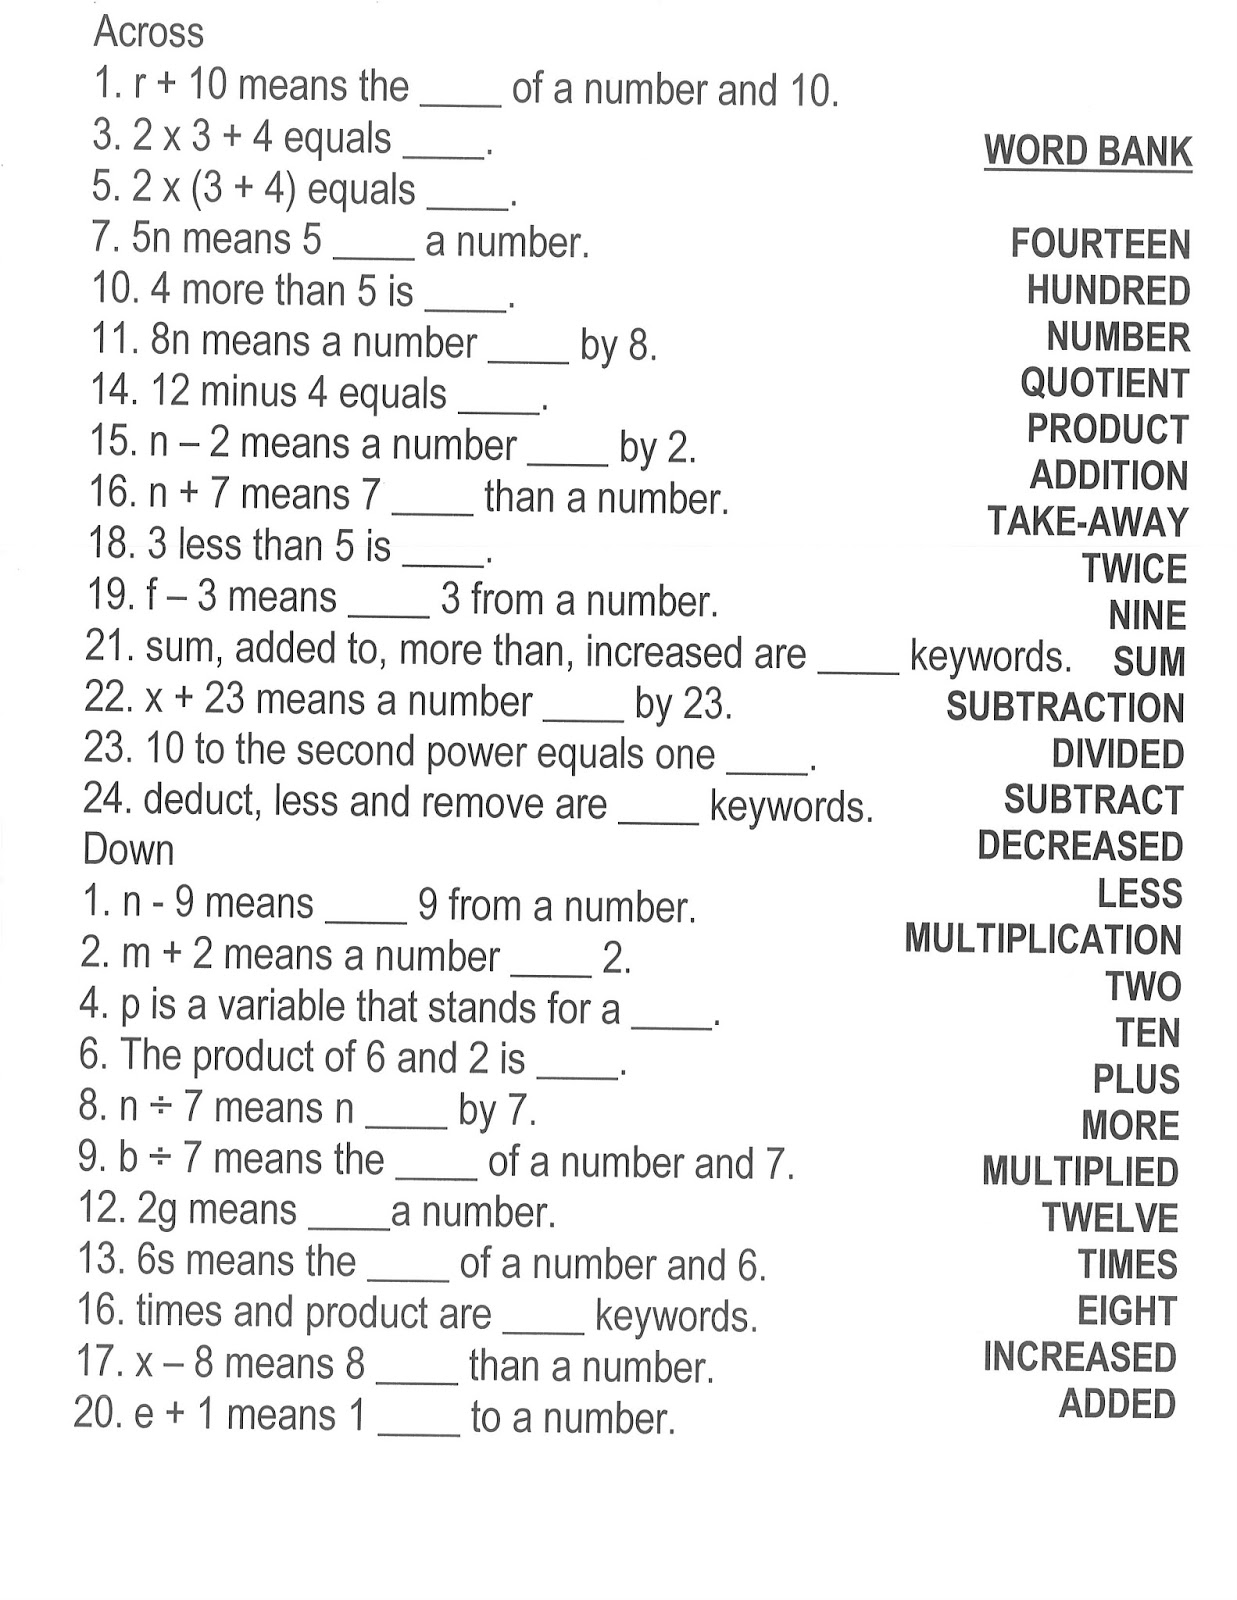 translating-phrases-into-algebraic-expressions-worksheets